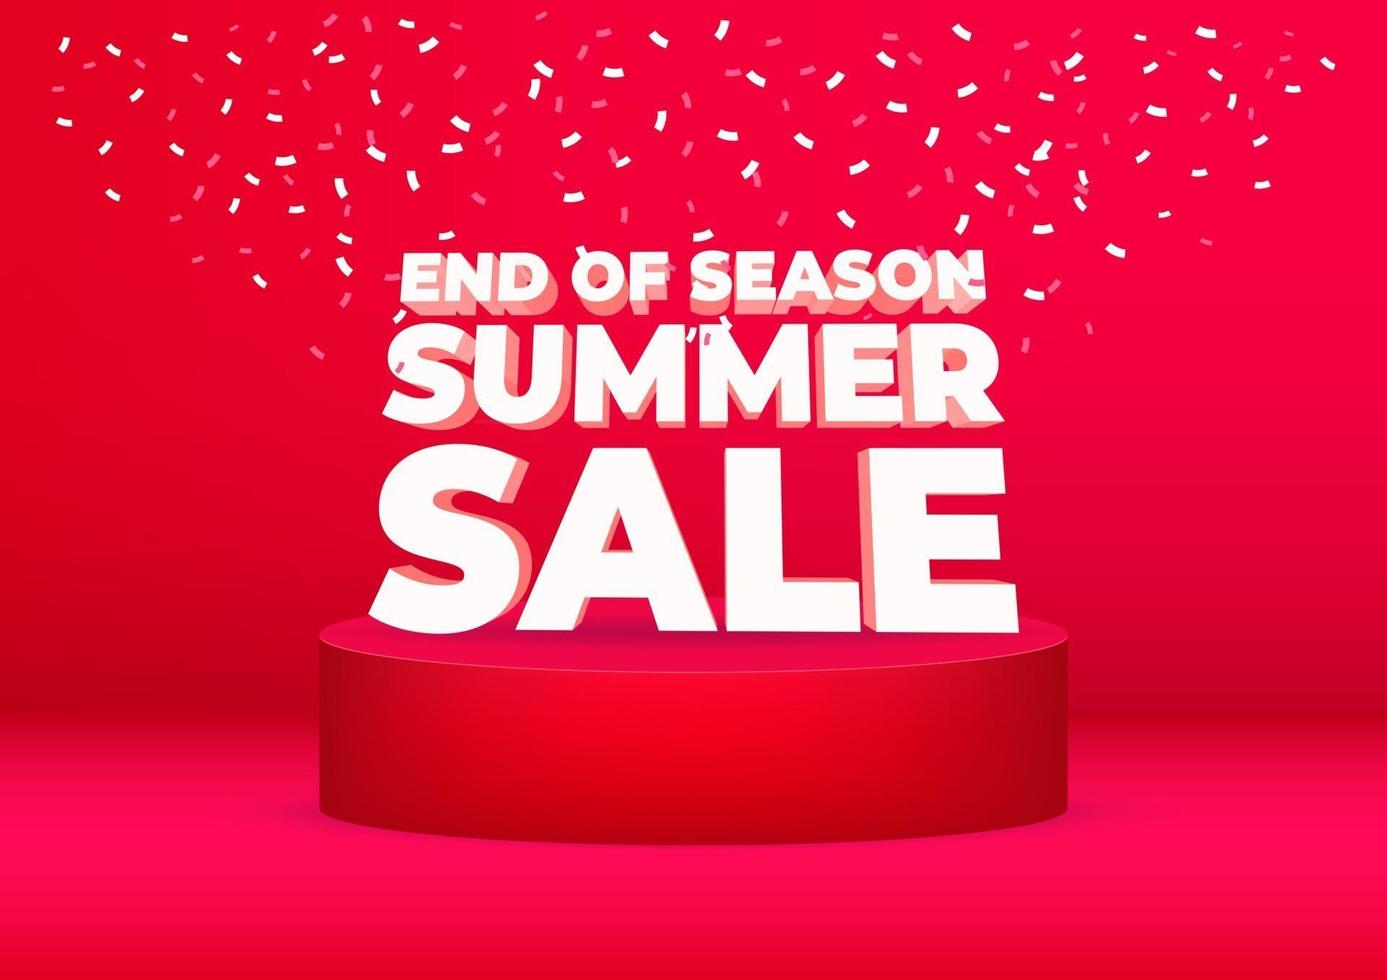 End of season summer sale poster or flyer design. End of season summer sale  on red background. vector